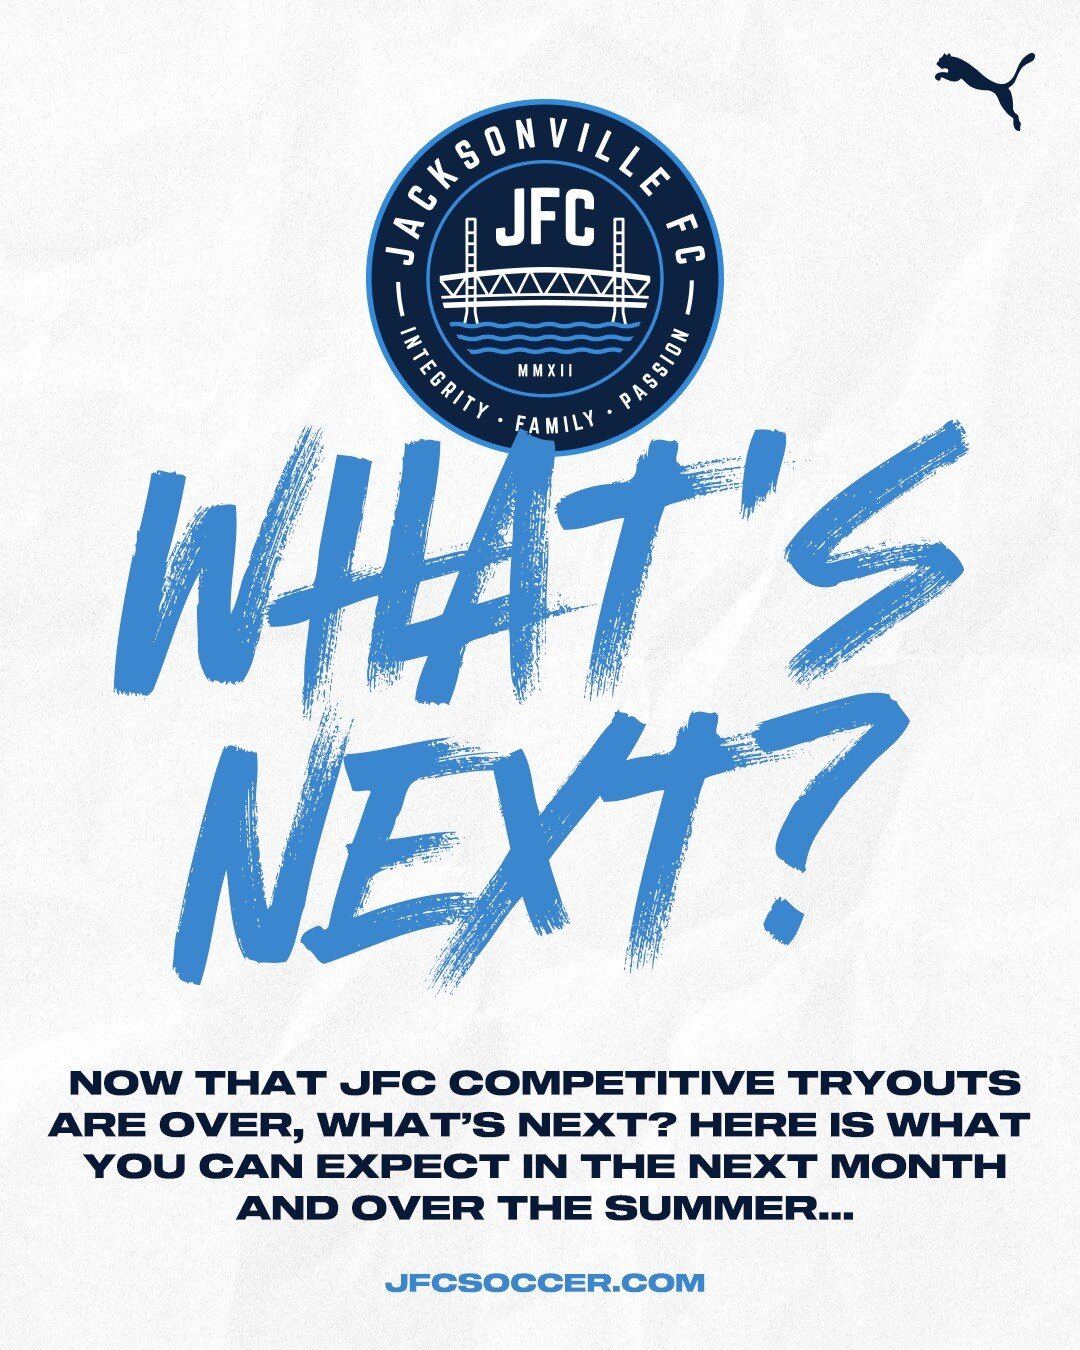 Here are some &quot;What's Next&quot; bits of information for everyone as we head into the summer break. We cannot thank everyone enough for the huge turnout for our competitive tryouts and we want to say thanks again for your patience and understand